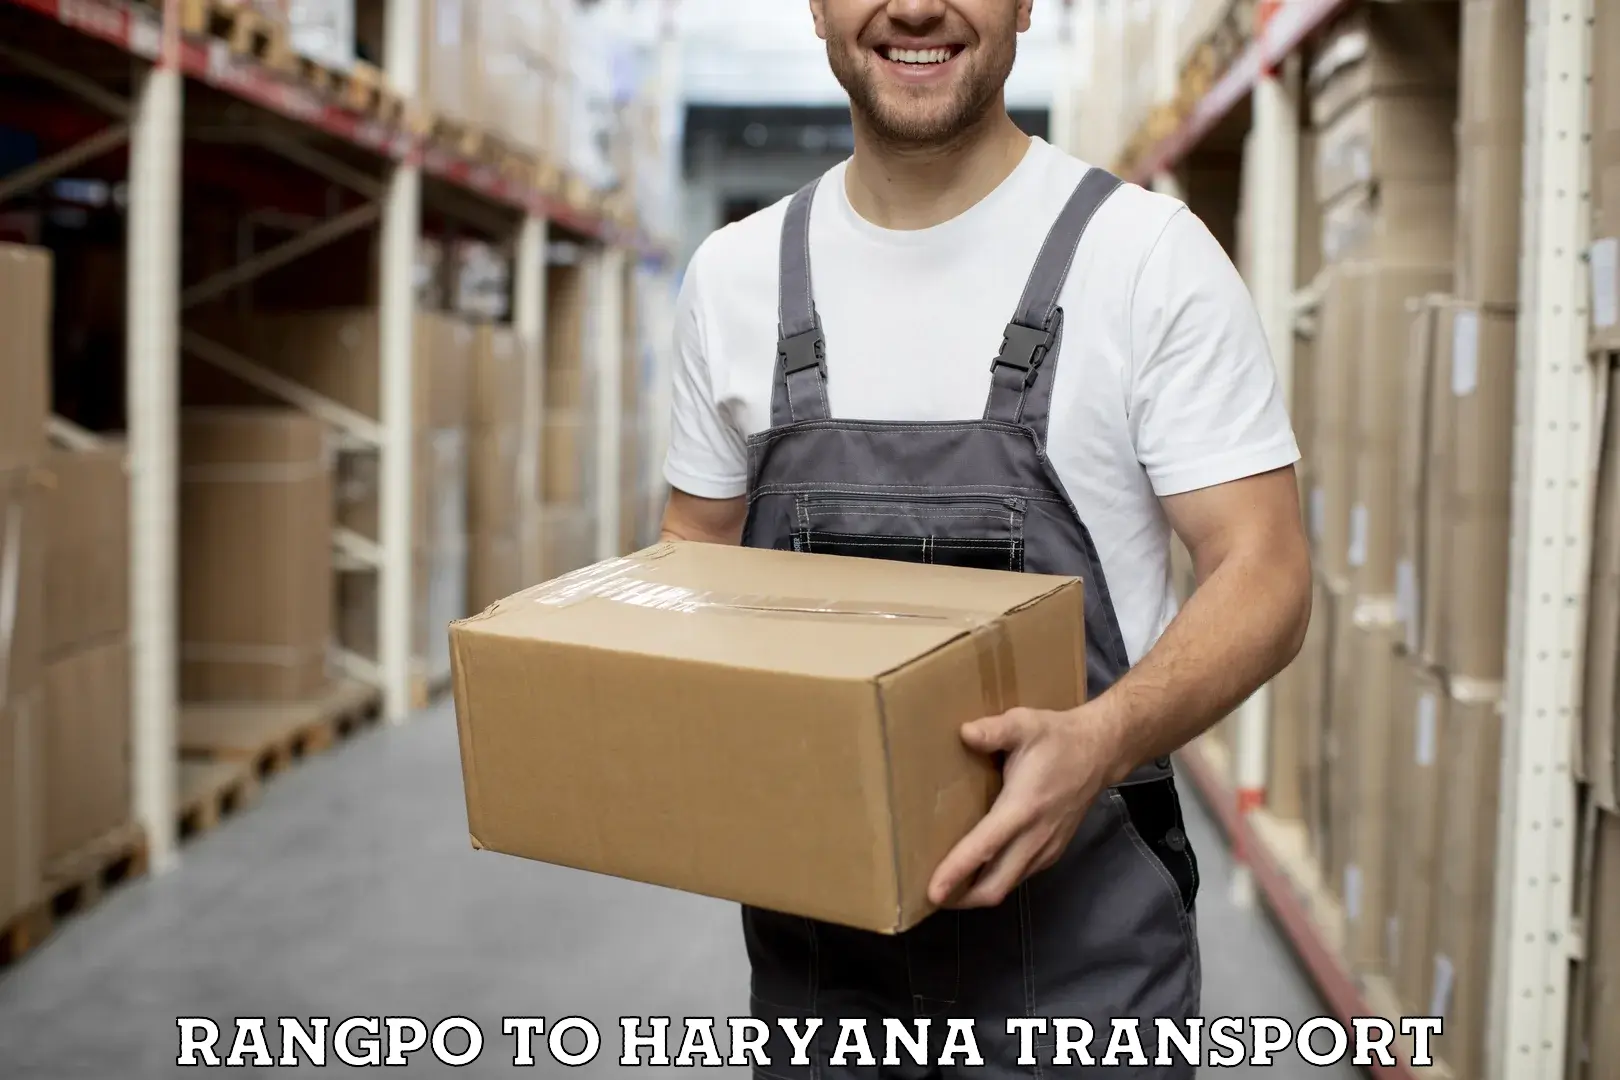 Best transport services in India in Rangpo to Gurgaon